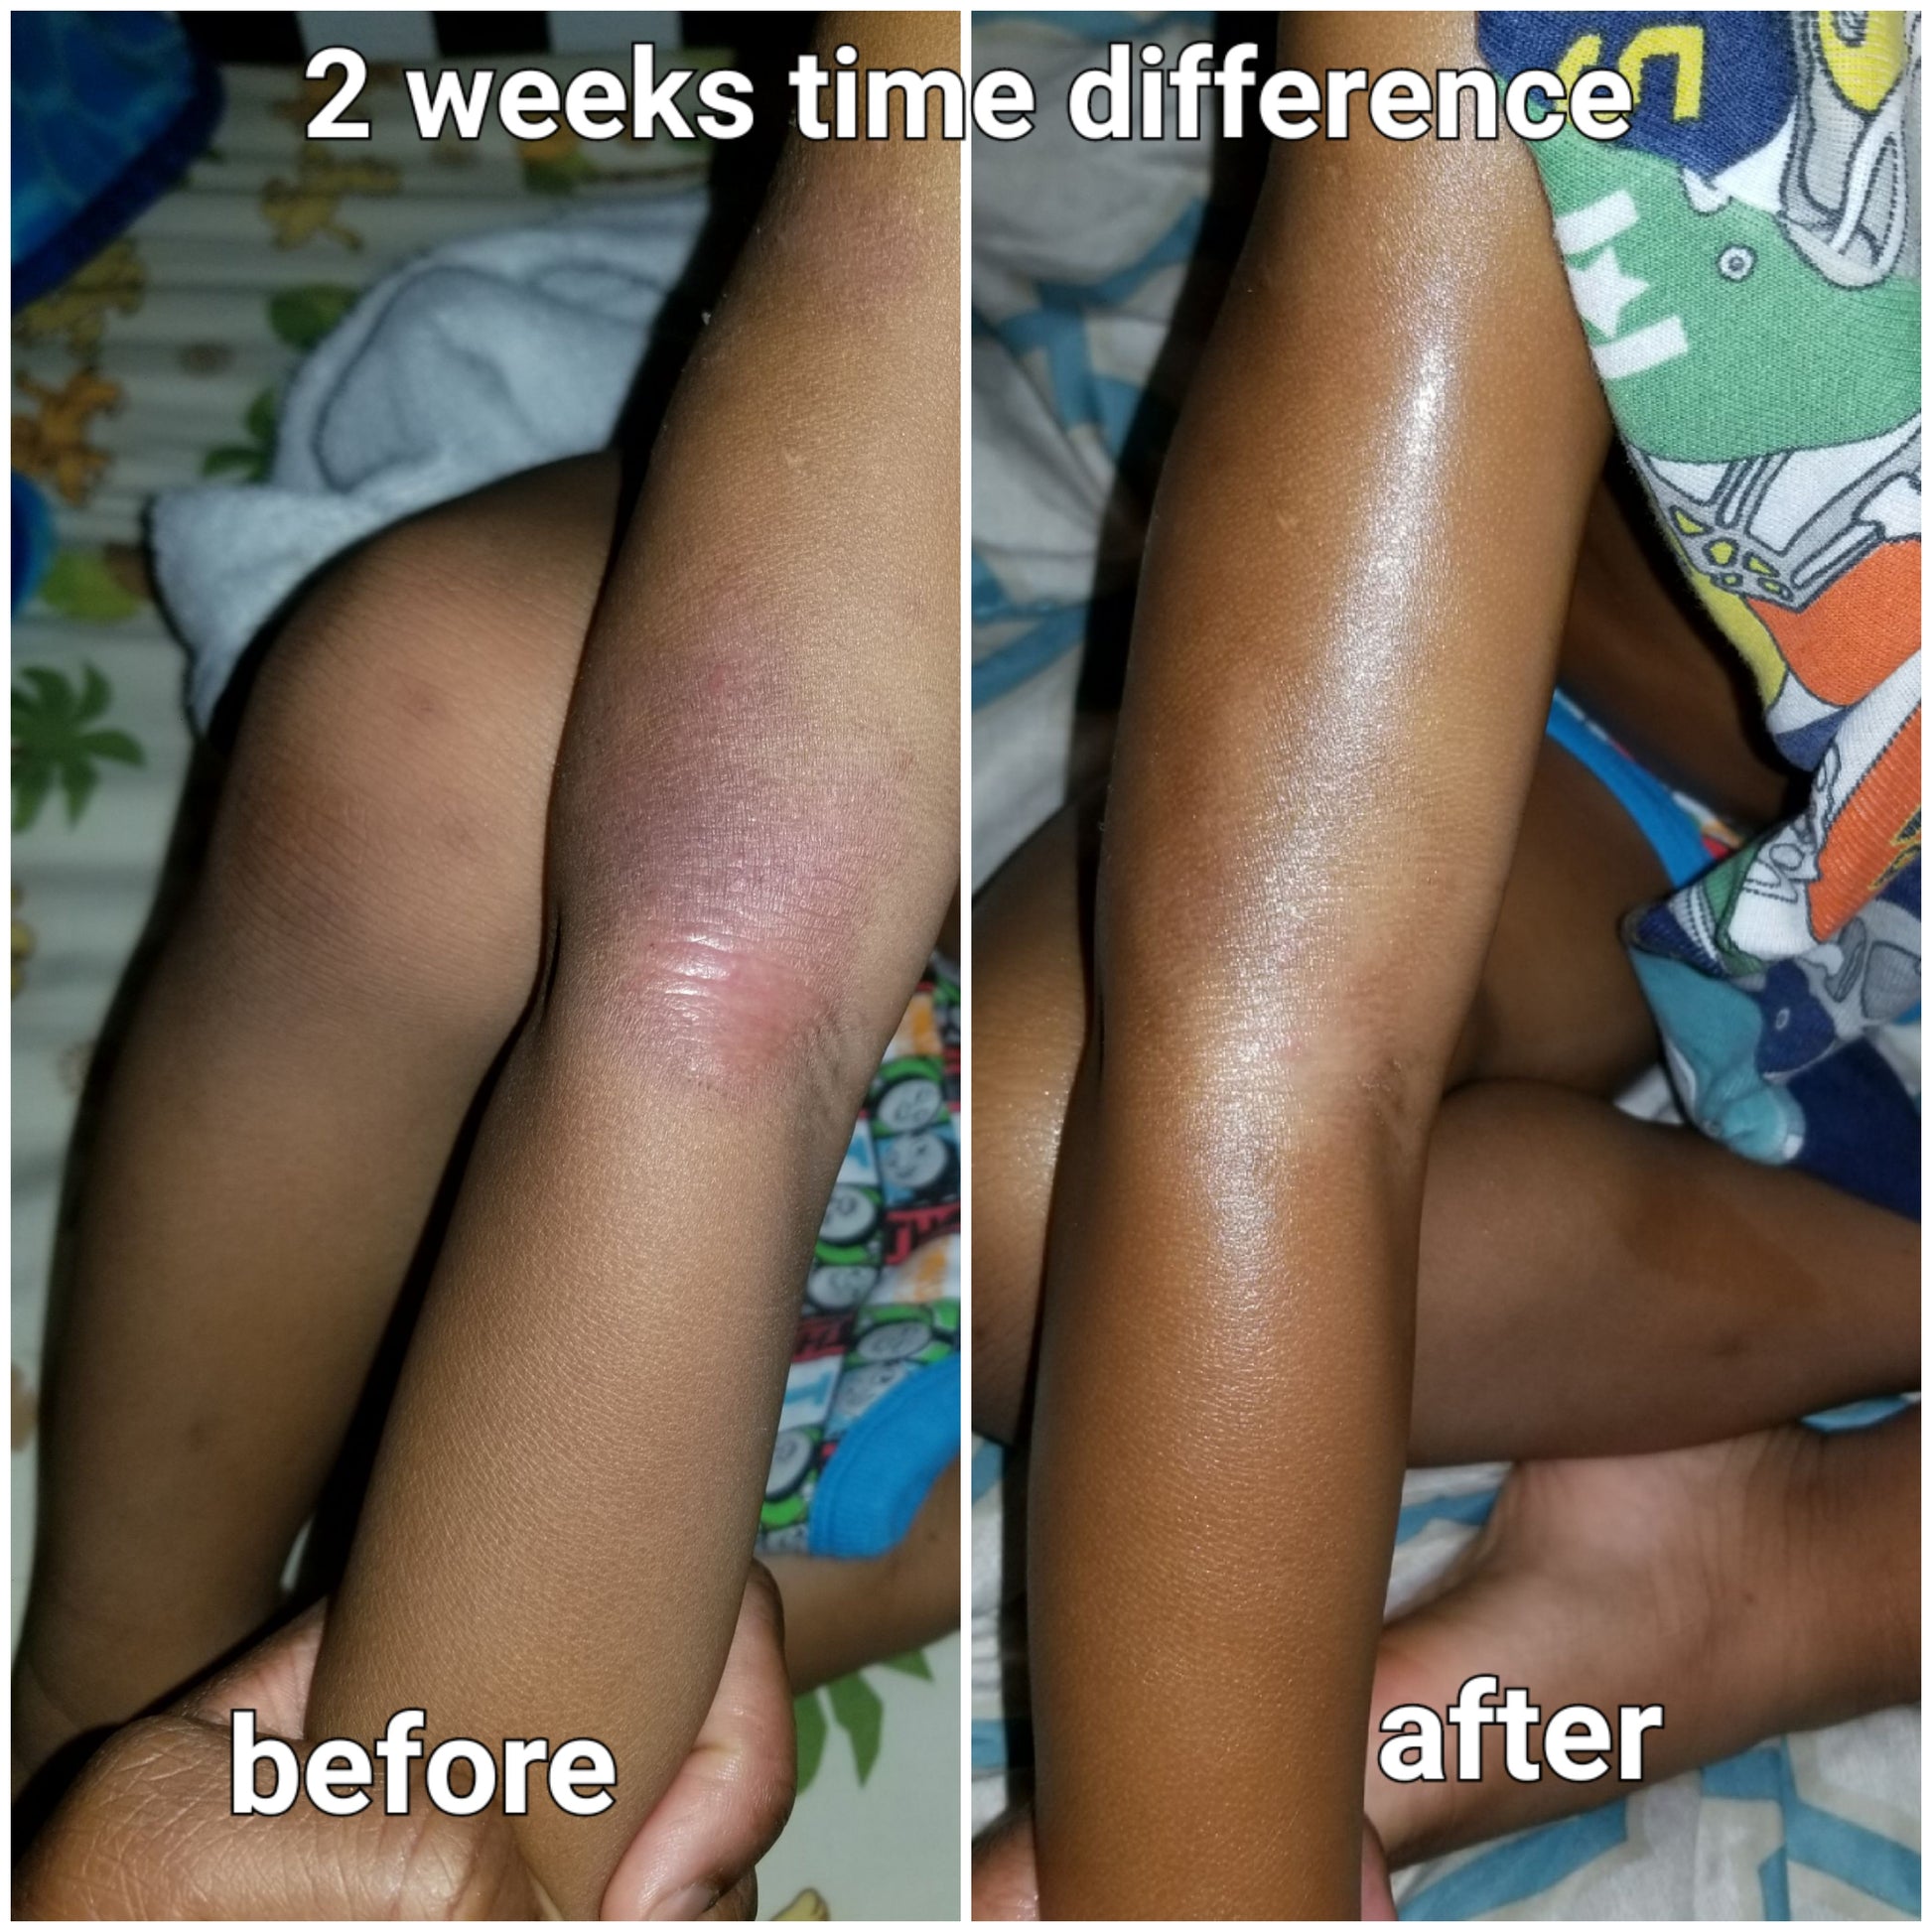 Before and after pic of eczema on a child arm